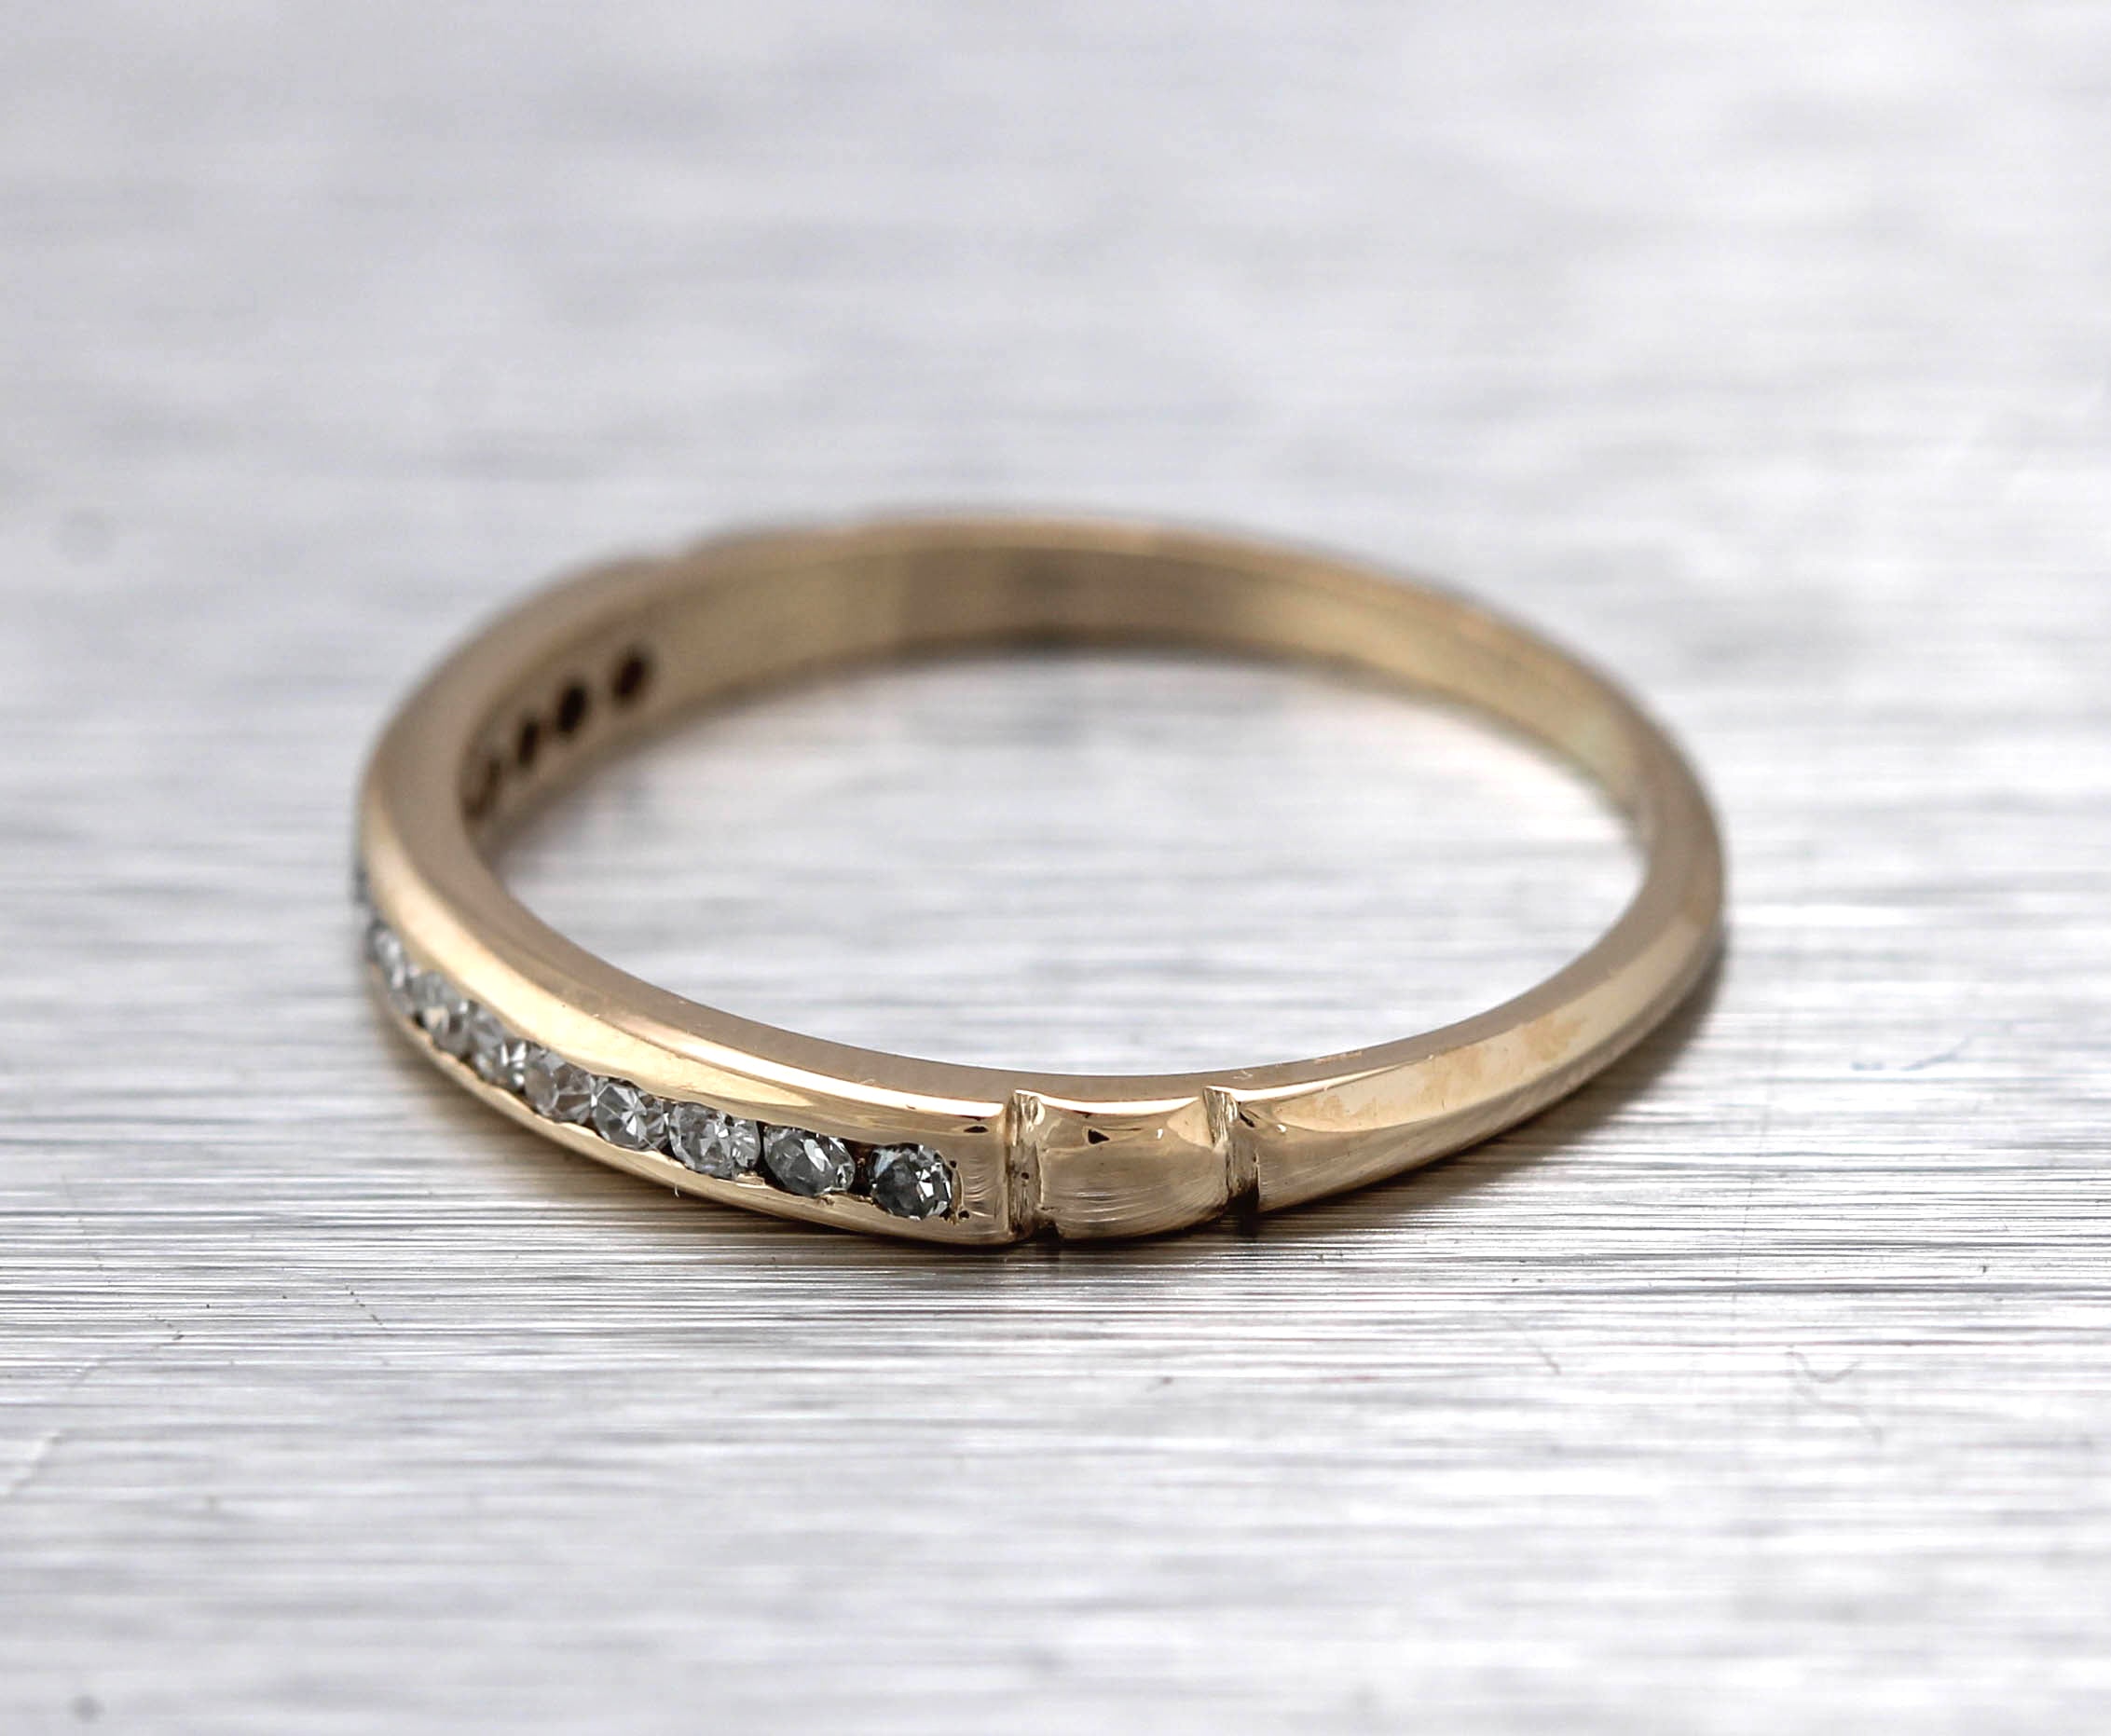 Lovely Ladies Dainty 14K Yellow Gold 3mm Wide 0.15ctw Diamond Stackable Ring